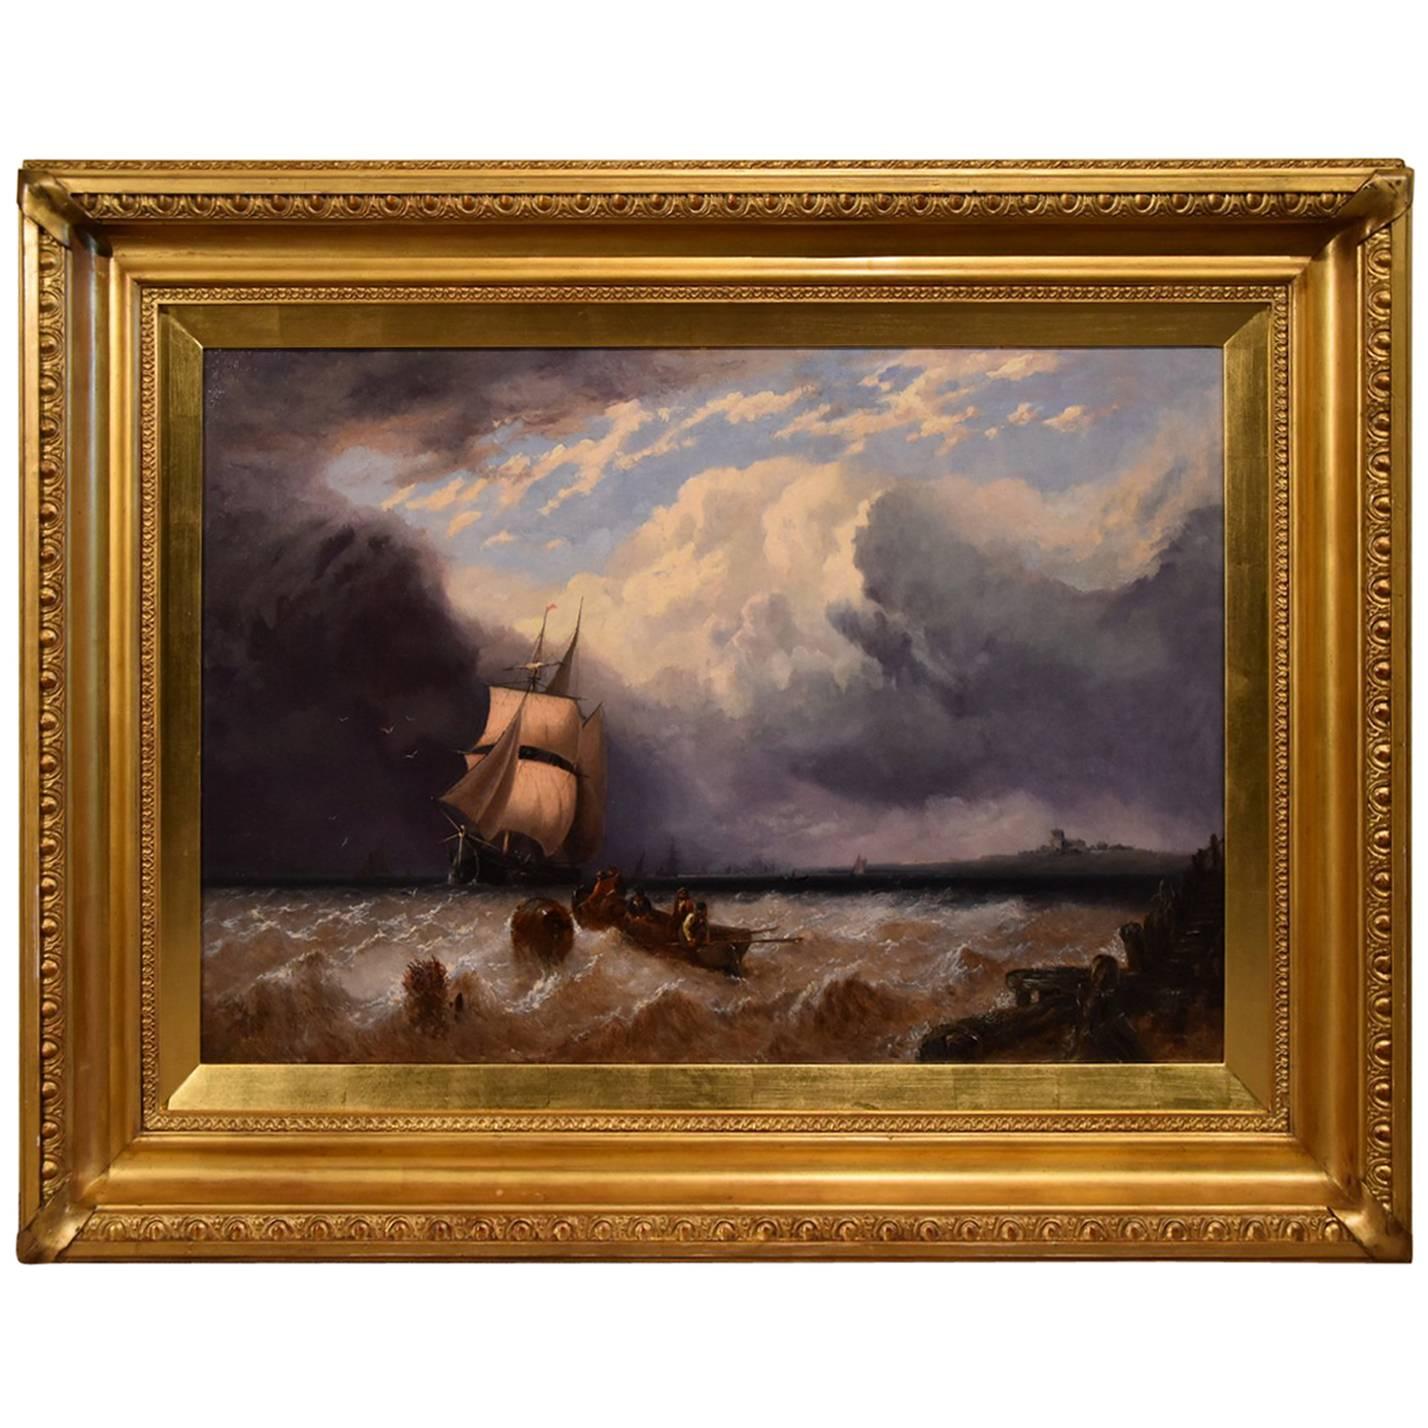 "A Brigantine off Tilbury" by George Stainton For Sale